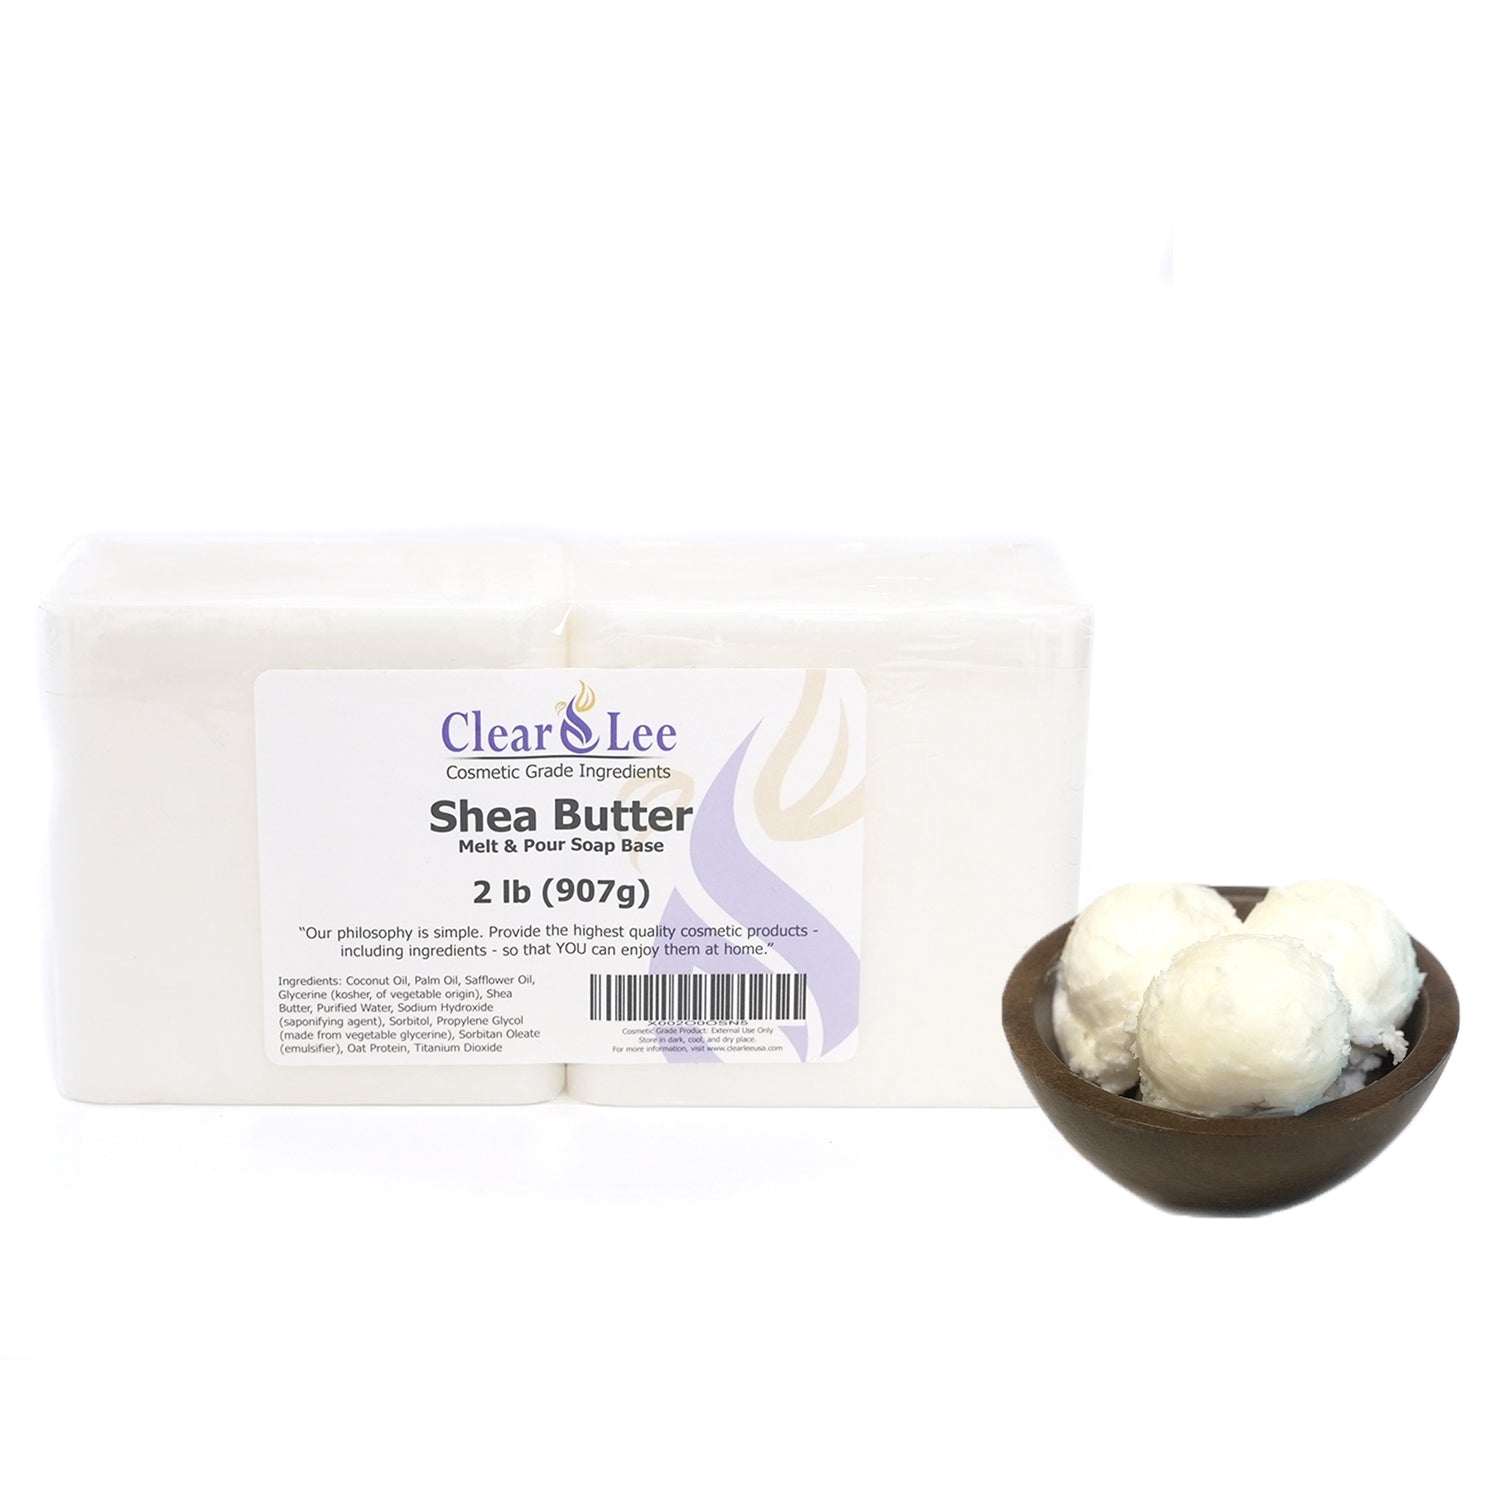 5 Lb UCHOOSE SOAP BASE Melt and Pour All Natural Cocoa Shea Butter Oatmeal  Goat's Milk Olive Oil Honey Aloe Vera Low Sweat Clear White Hemp -   Sweden